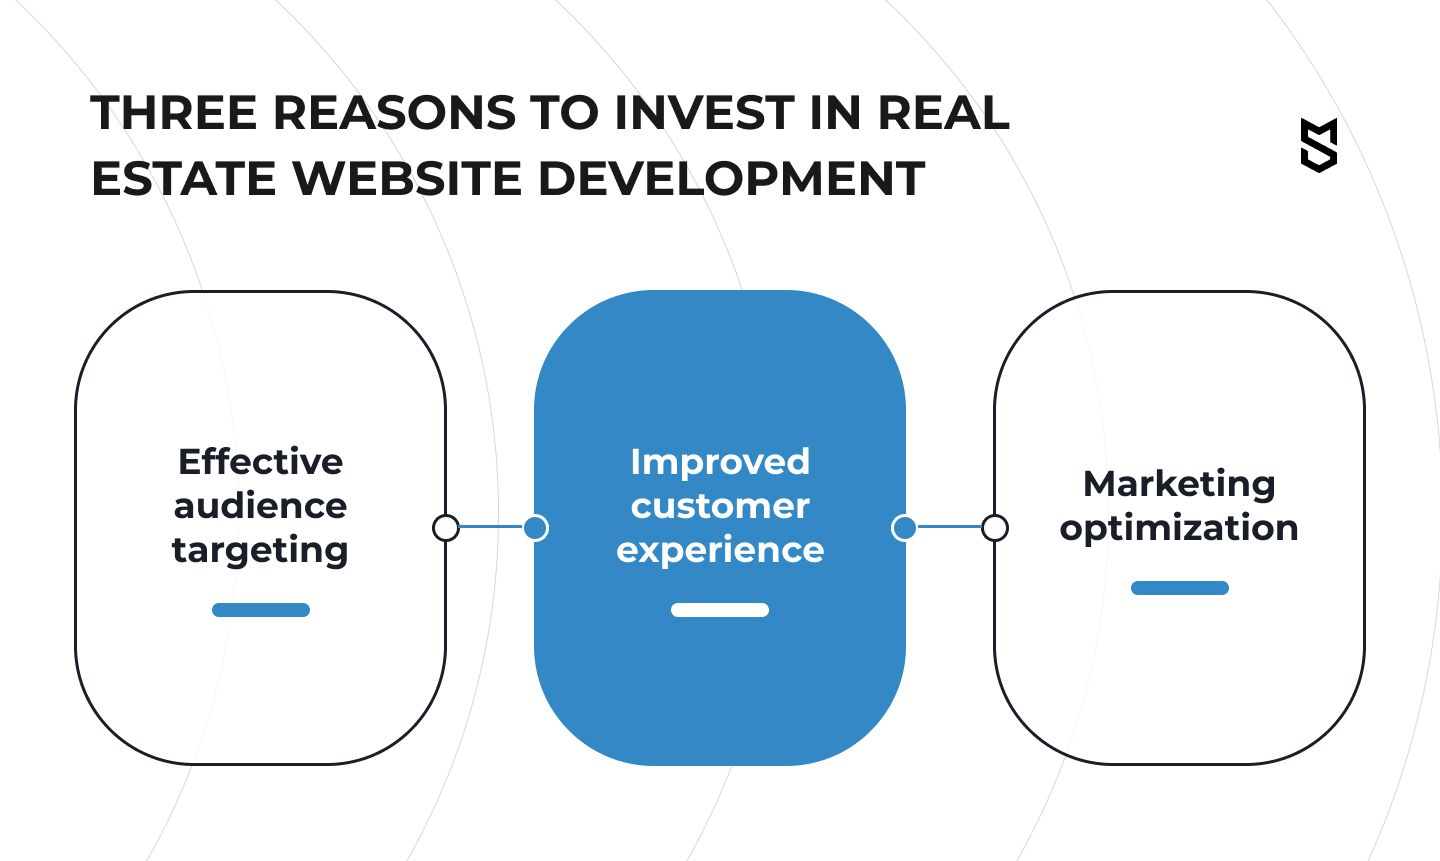 Three reasons to invest in real estate website development